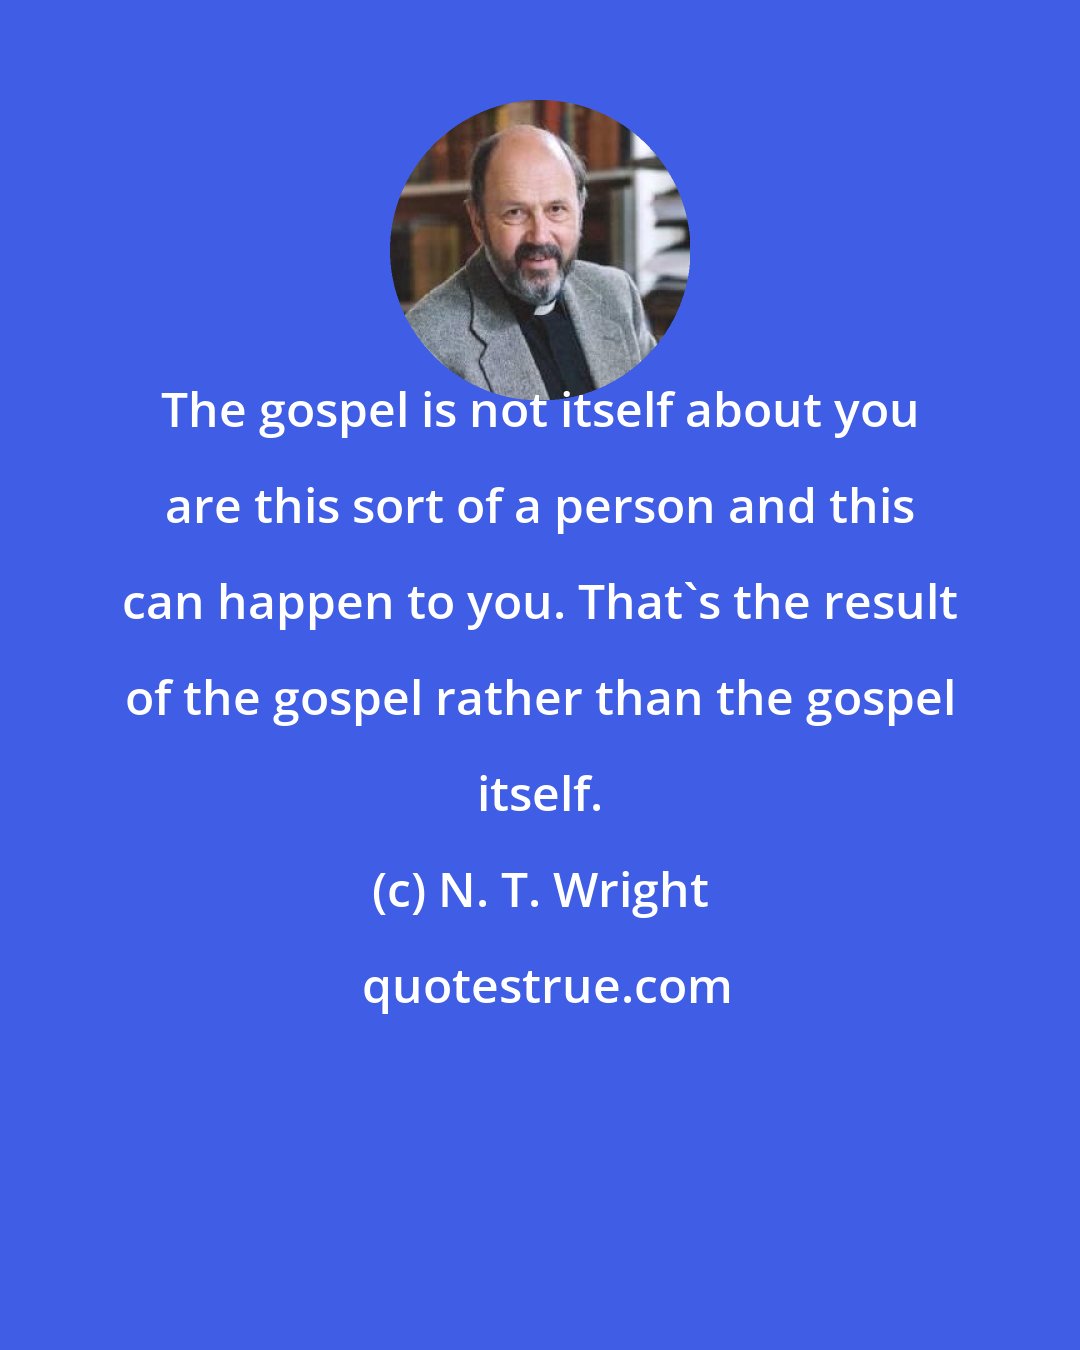 N. T. Wright: The gospel is not itself about you are this sort of a person and this can happen to you. That's the result of the gospel rather than the gospel itself.